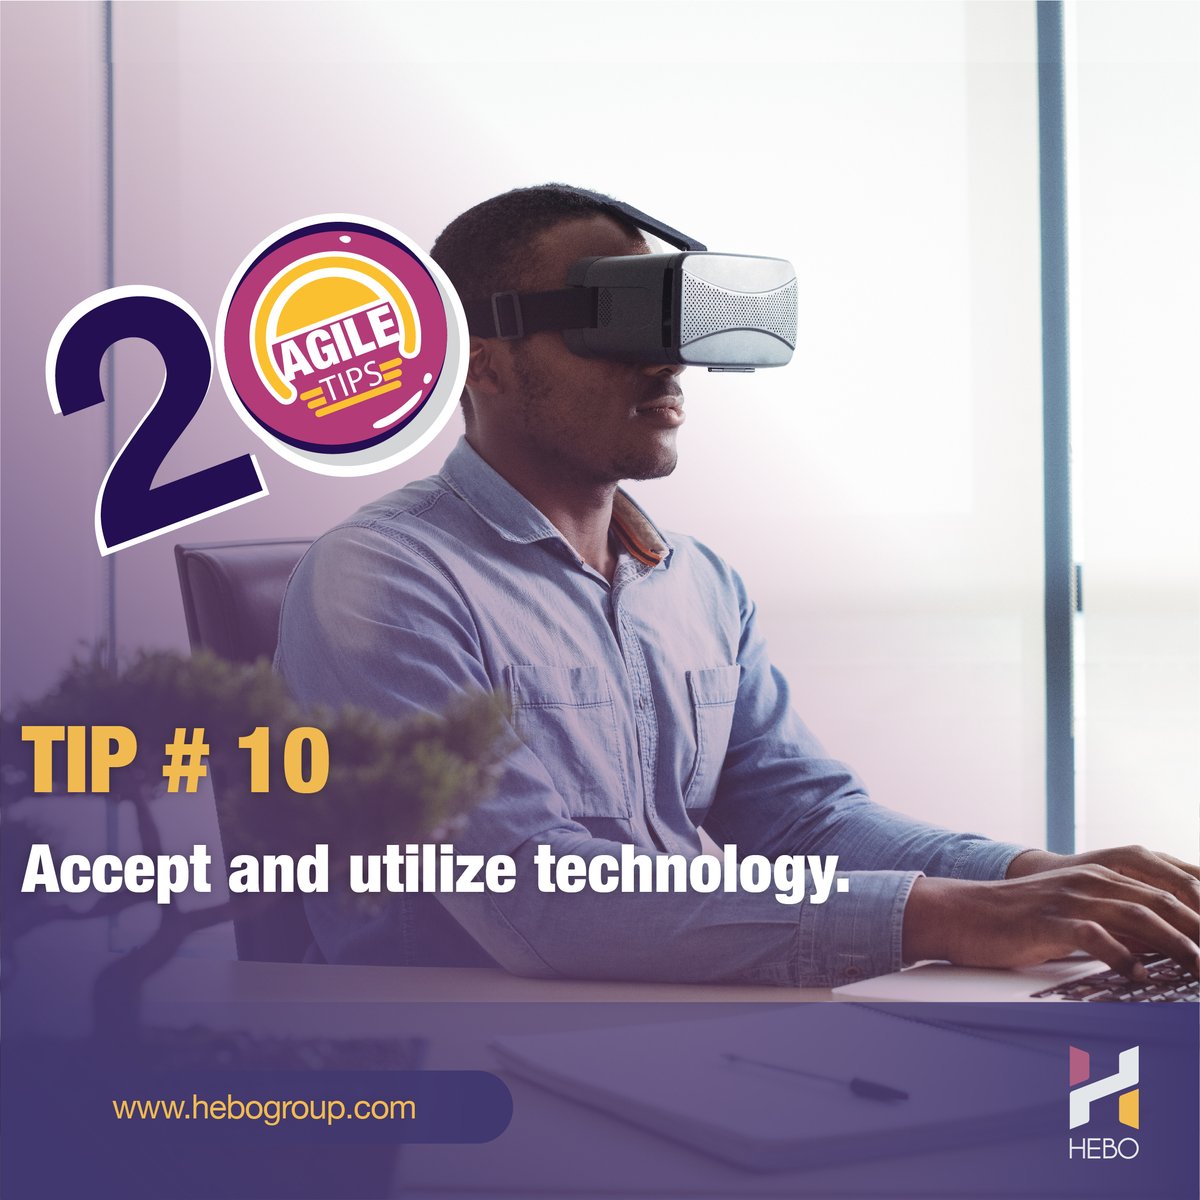 🚀 Agile tip #10: Accept & Utilize Technology! Unlock the power of digital tools to supercharge your productivity. Explore all 20 tips: read on this link bit.ly/3FNv5BD
#PlanYourNext #AgileTips #TechAdvantage